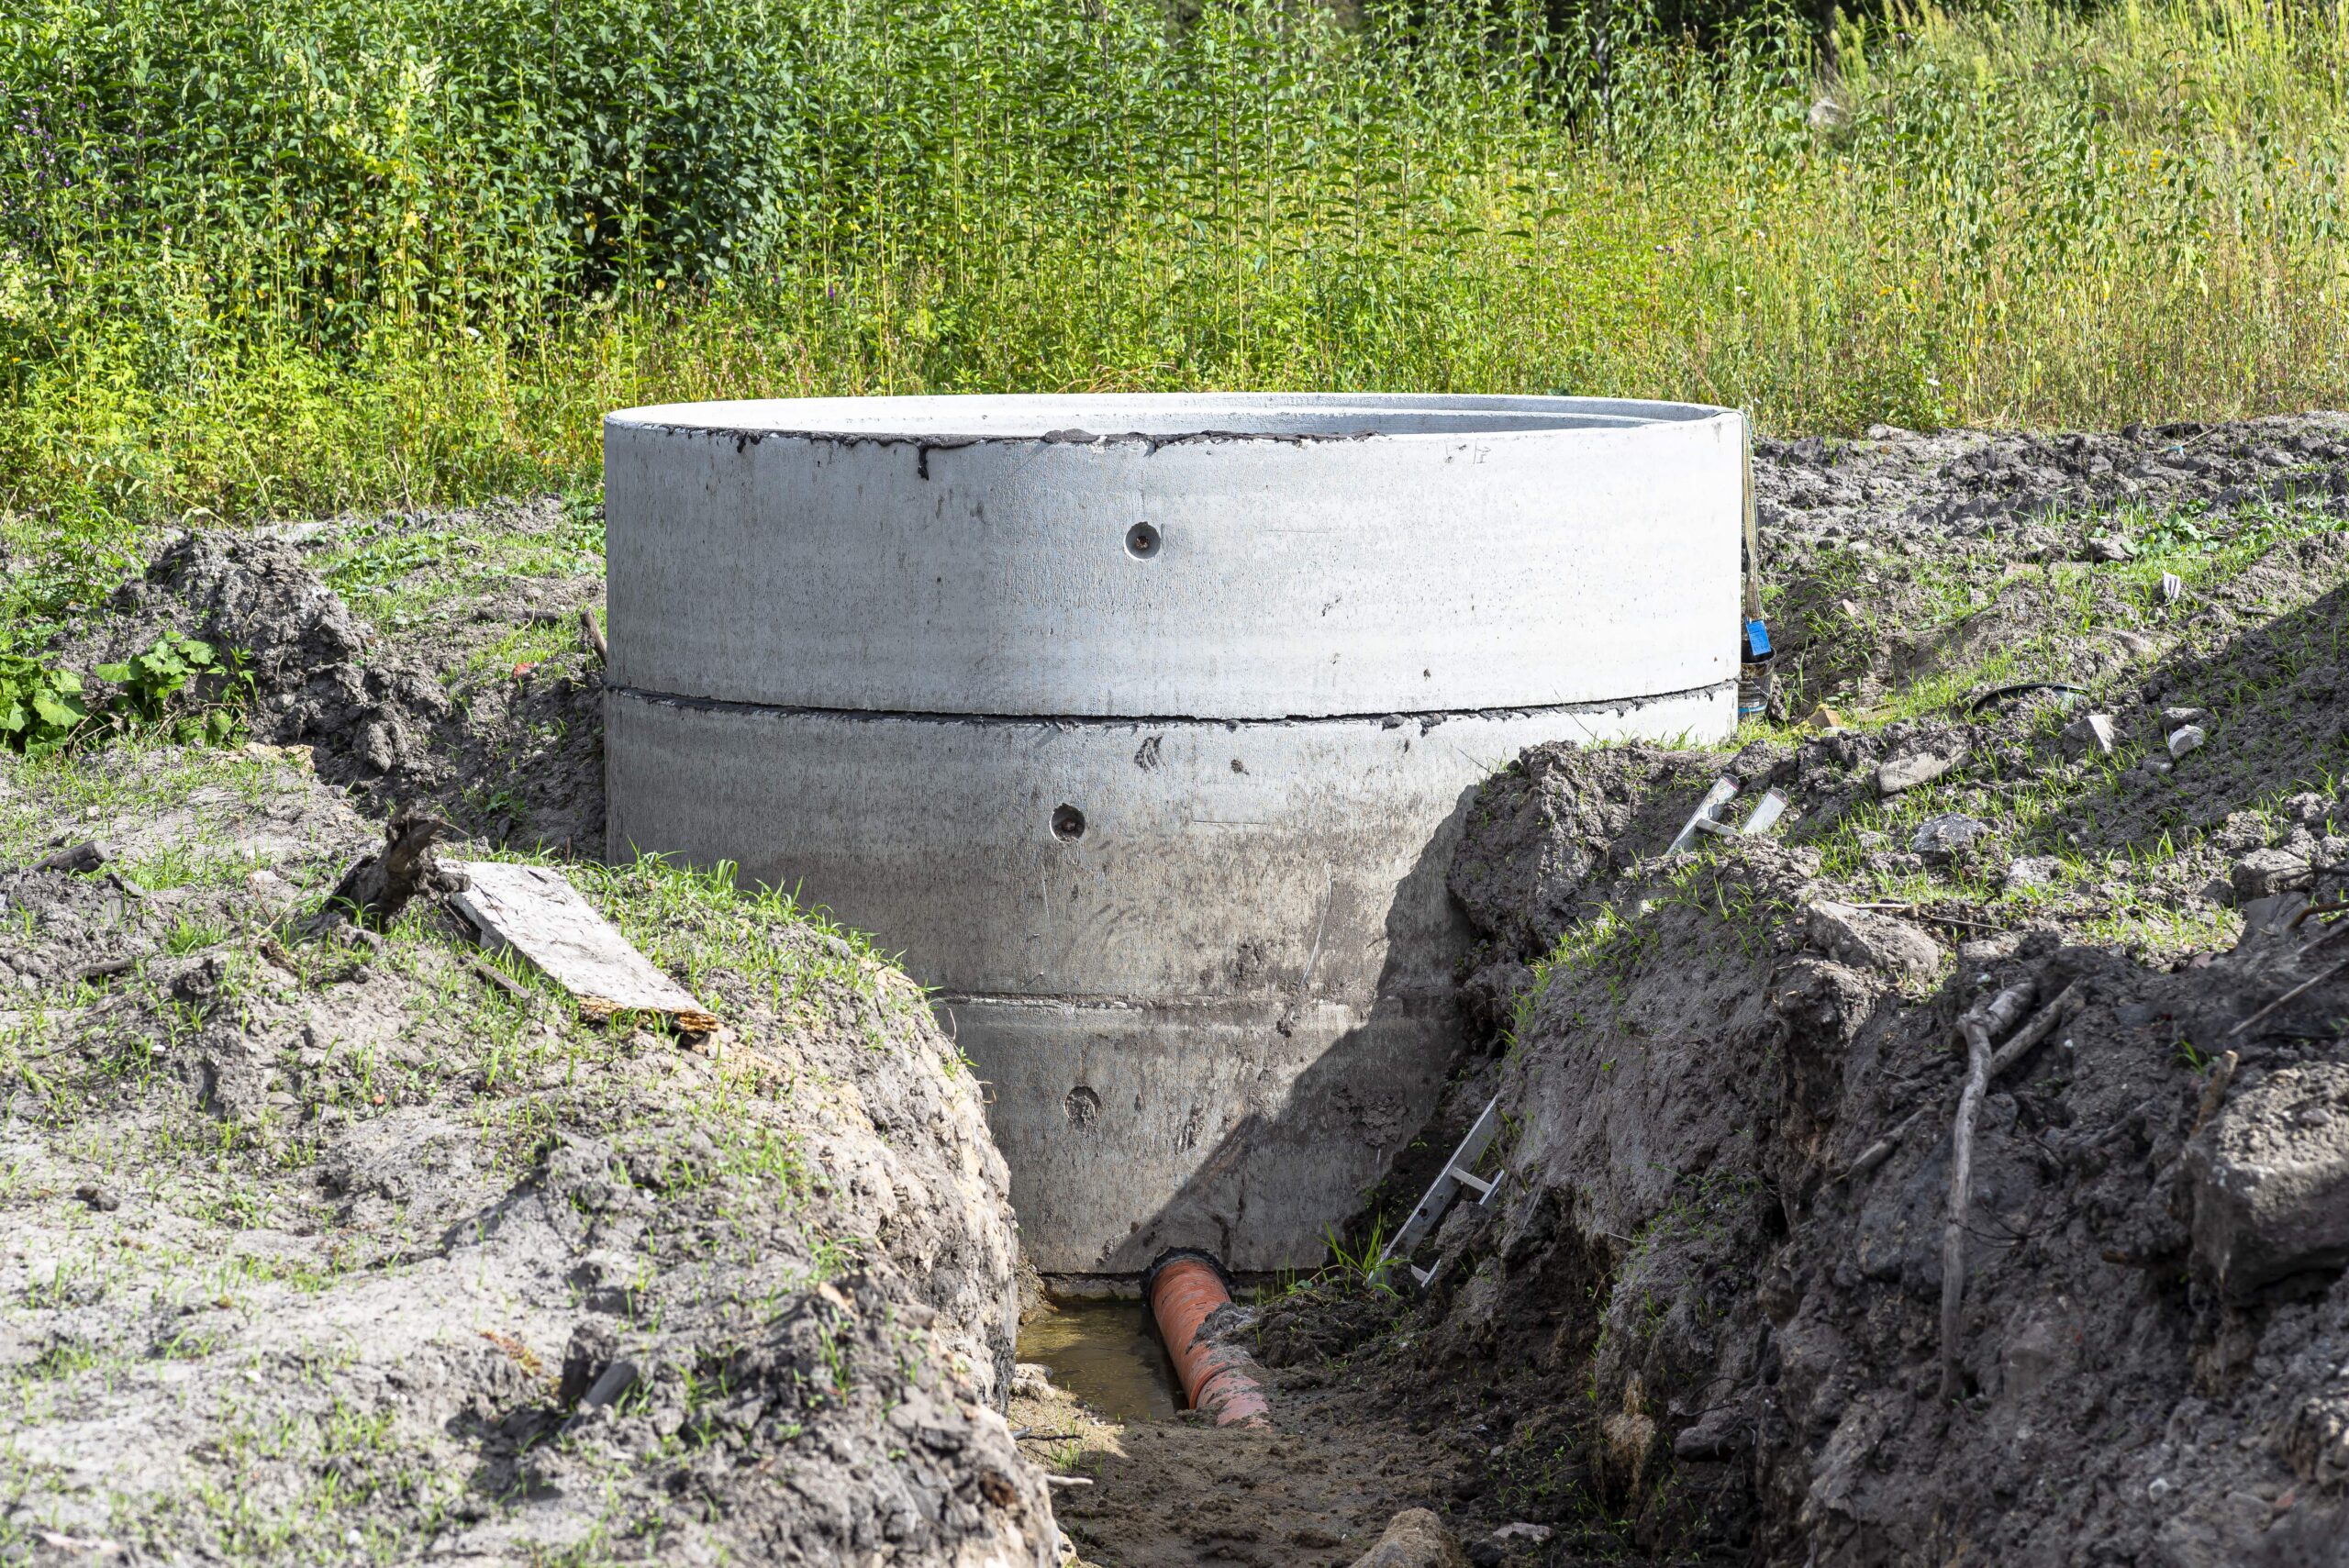 a concrete septic tank - a good method of greywater recycling